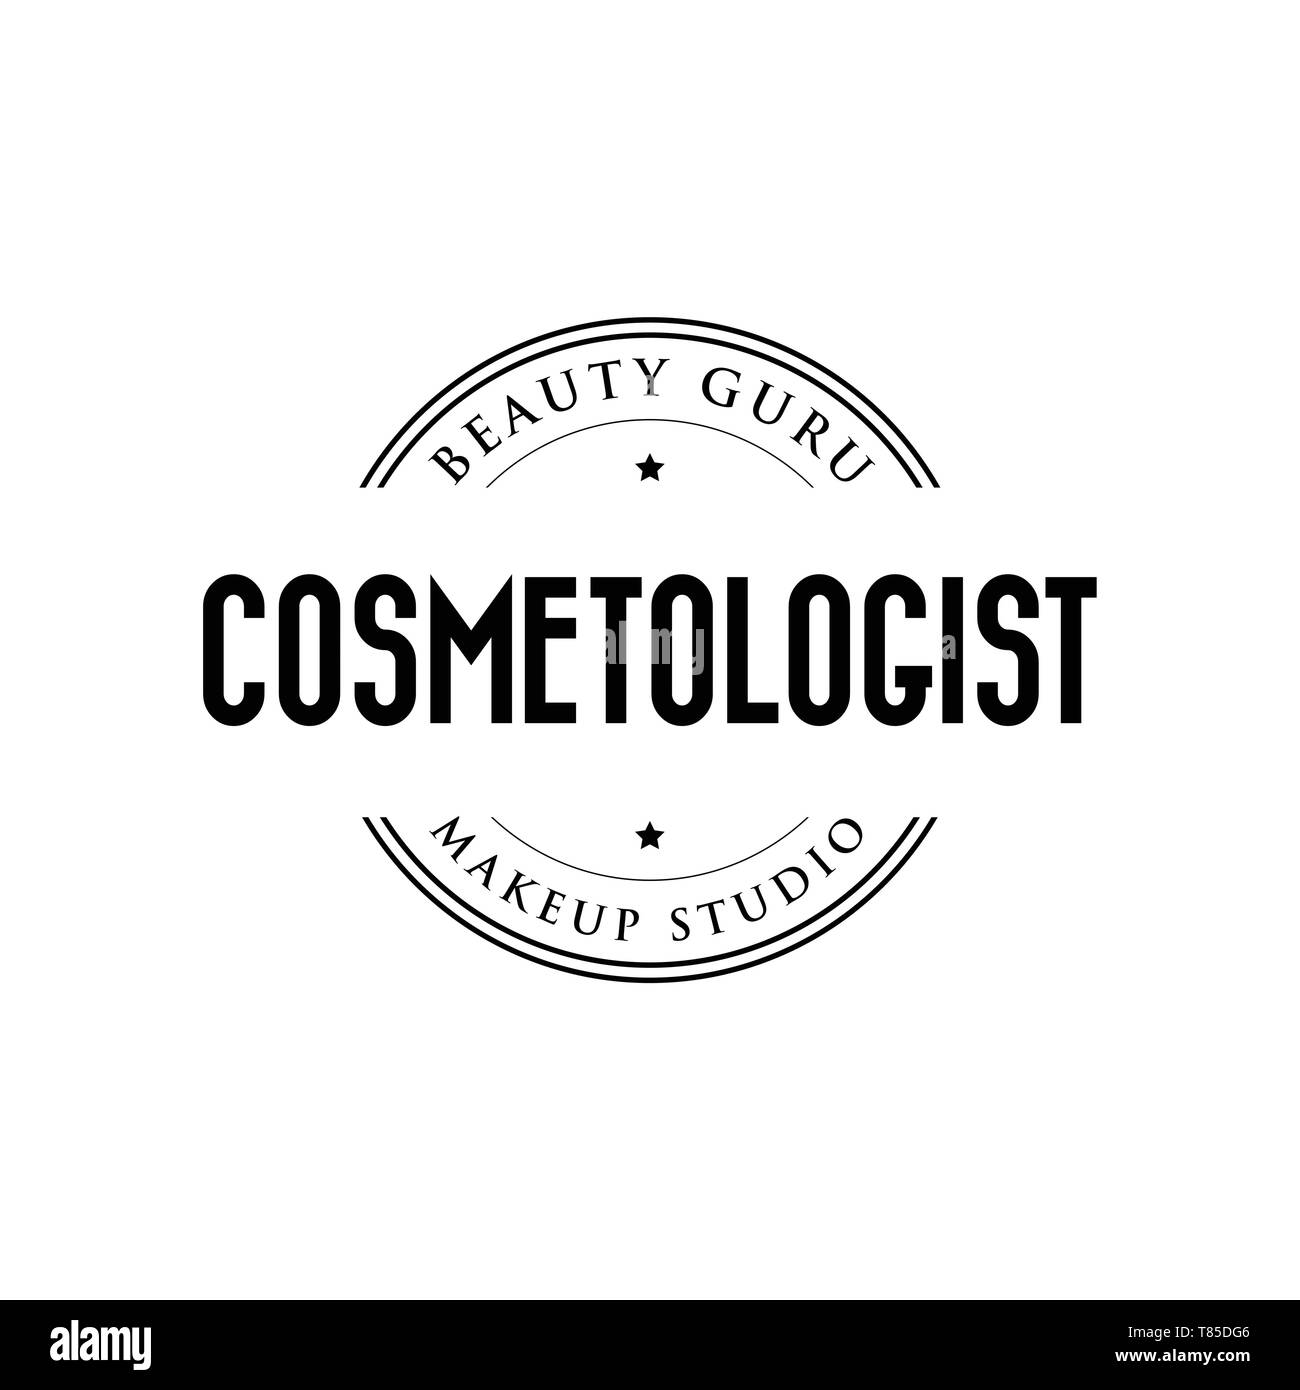 Cosmetologist logo stamp vintage Stock Vector